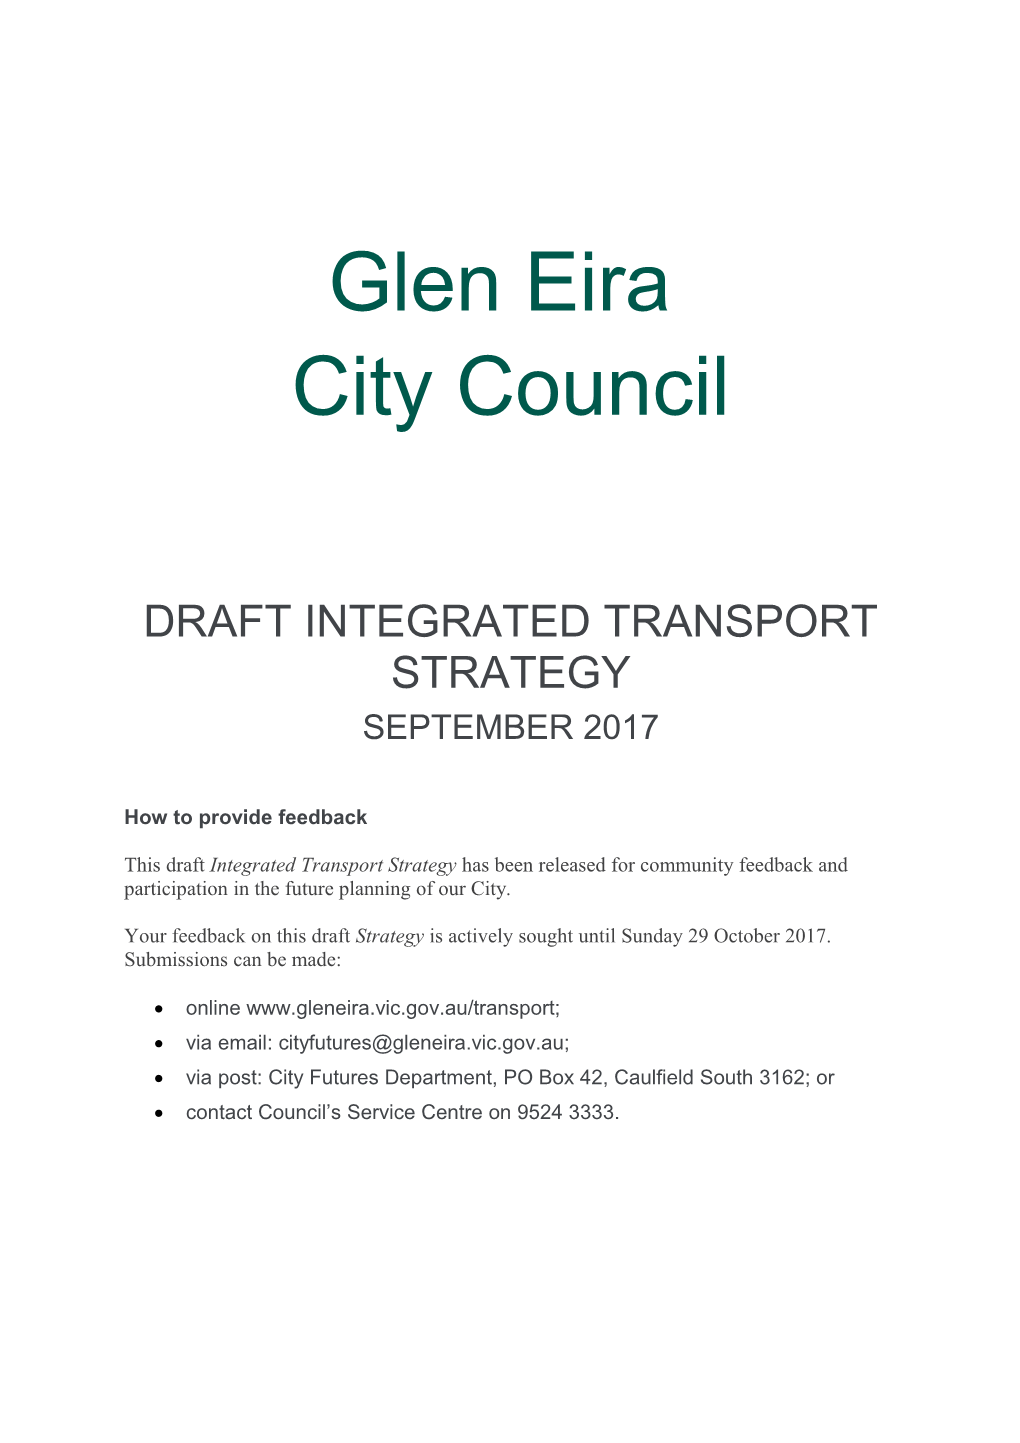 Draft Integrated Transport Strategy